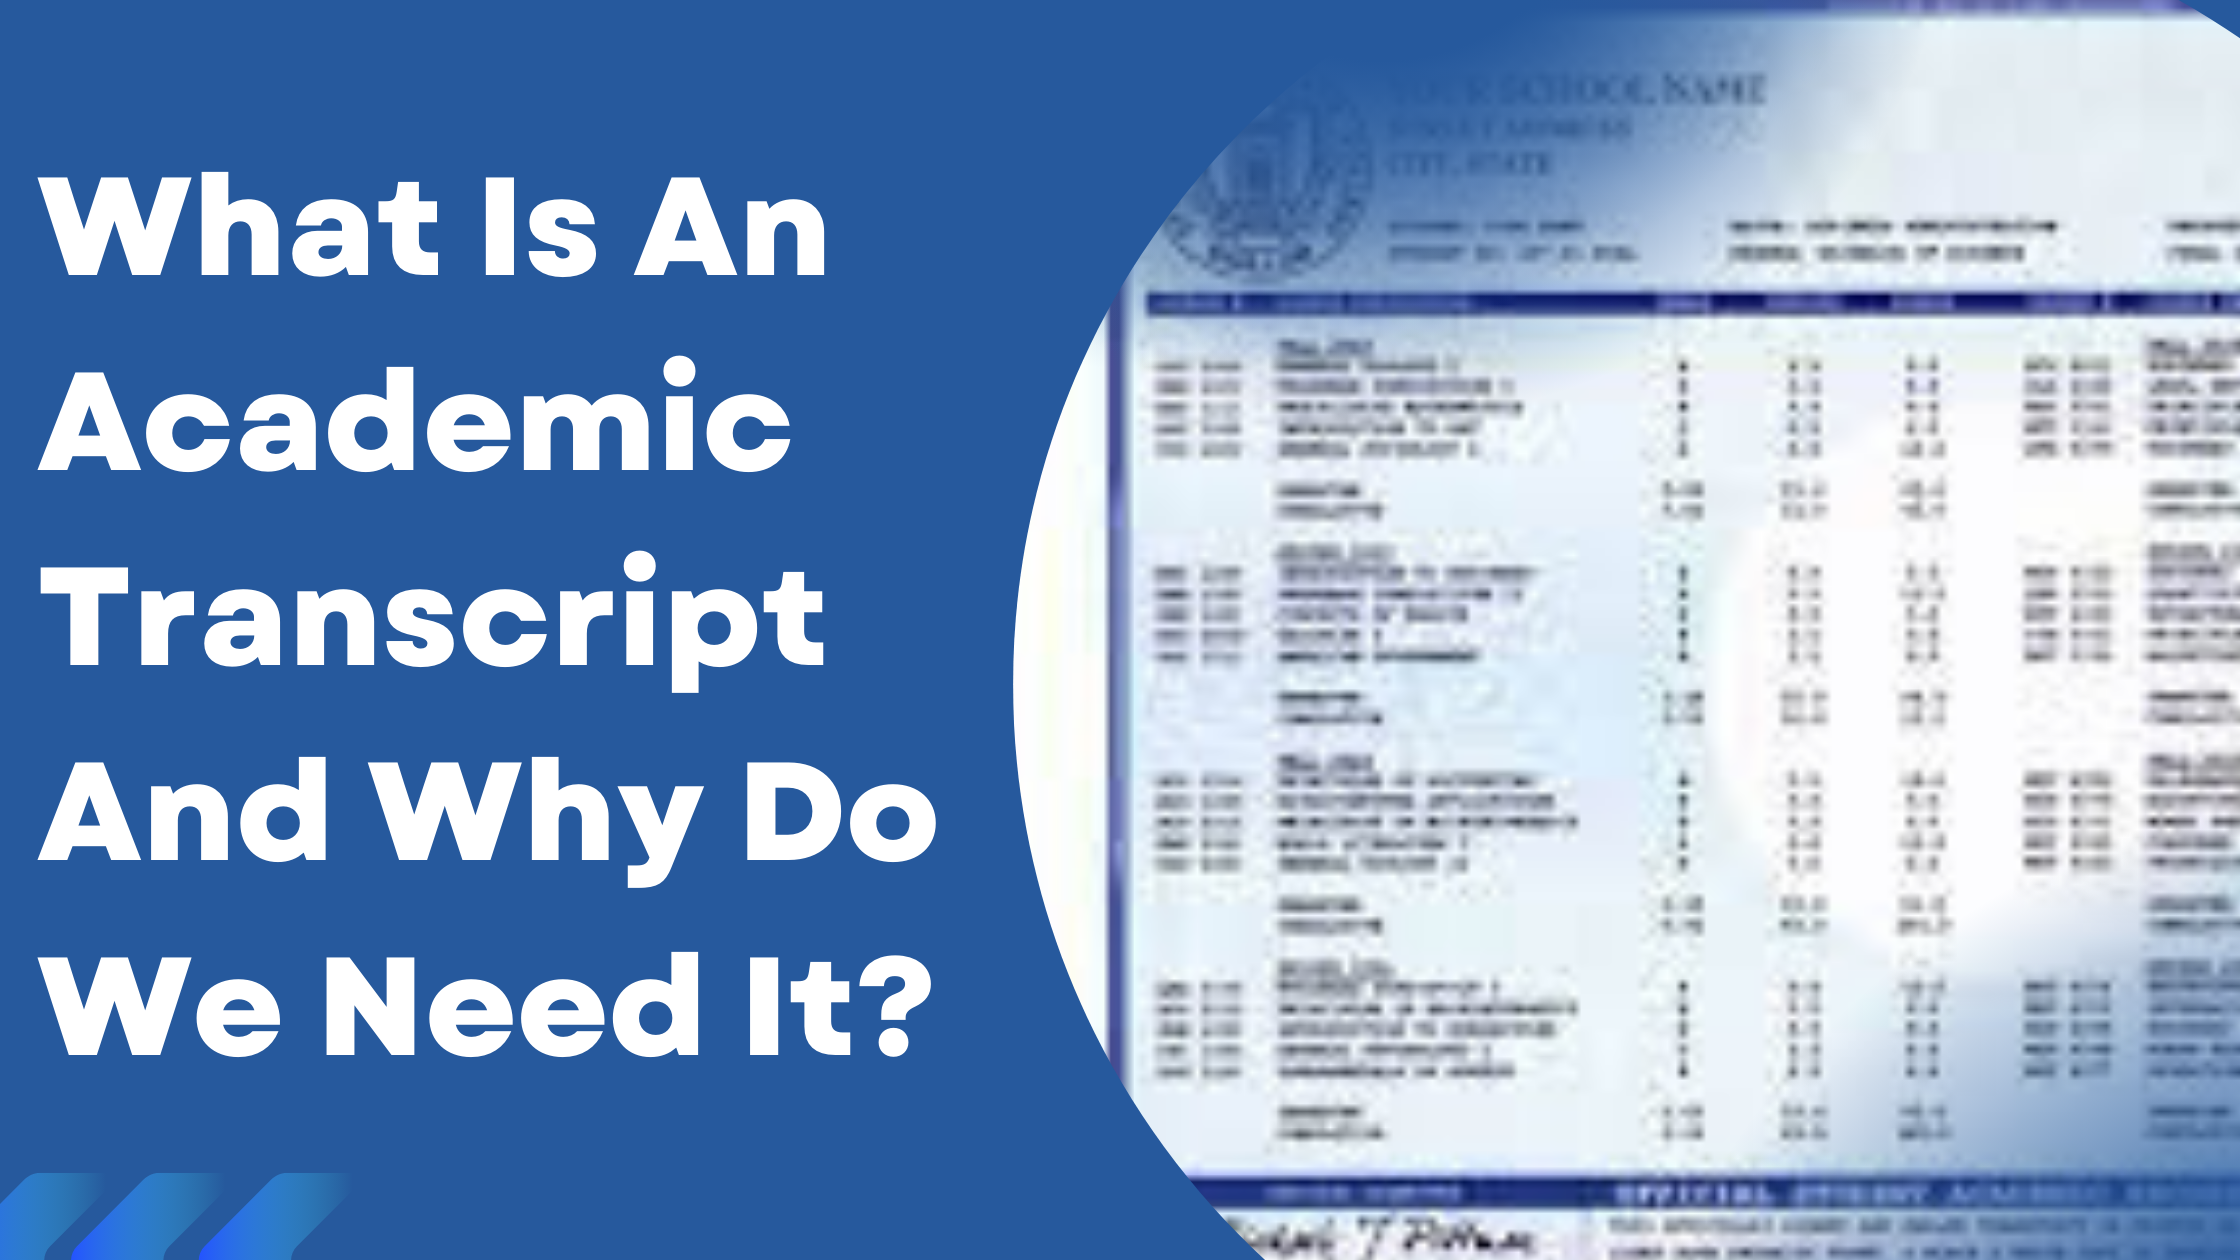 What Is An Academic Transcript And Why Do We Need It?